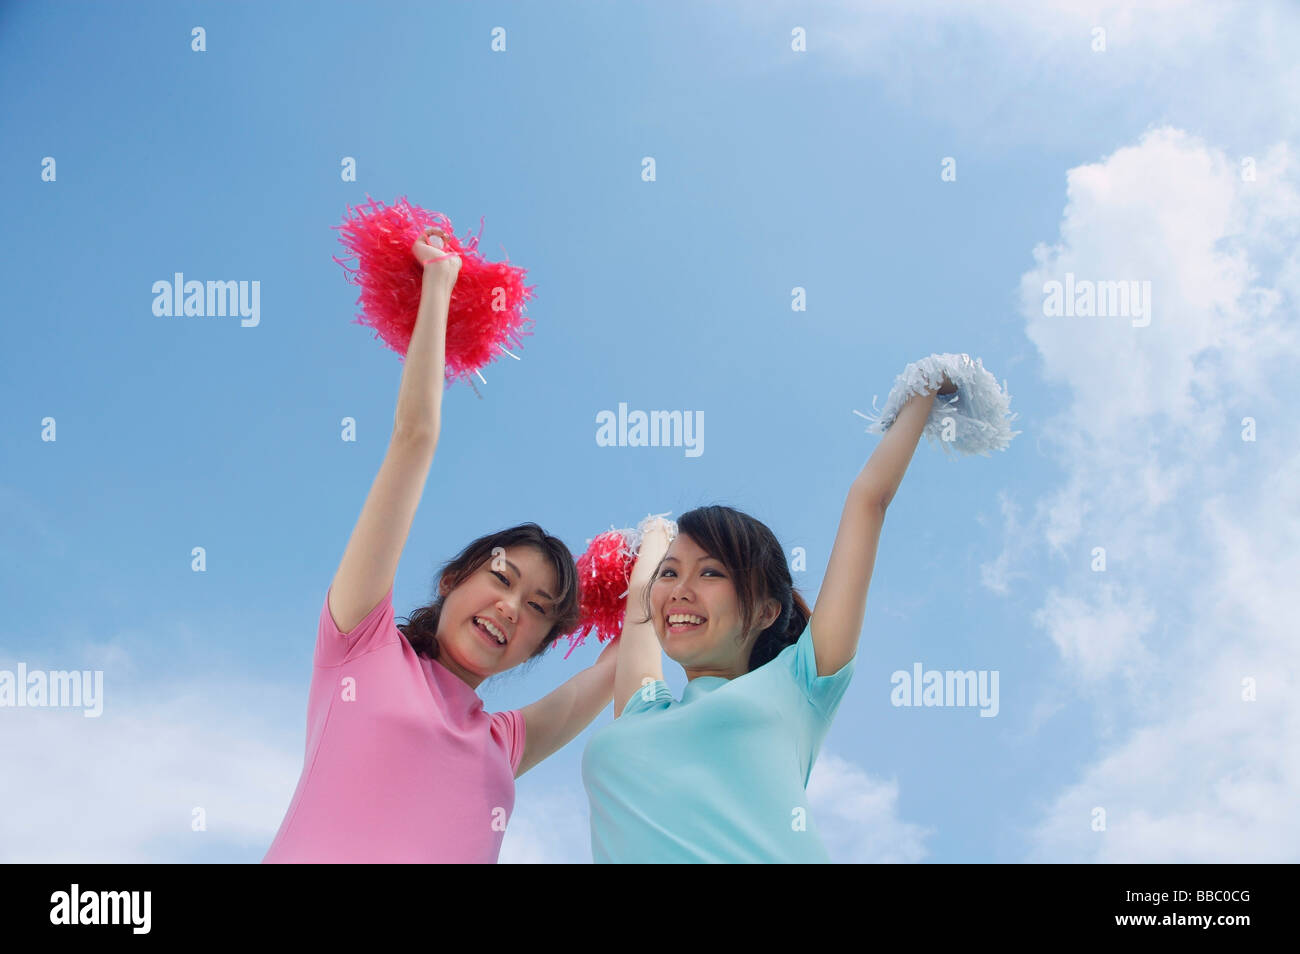 Young woman cheerleading with pom poms Stock Photo